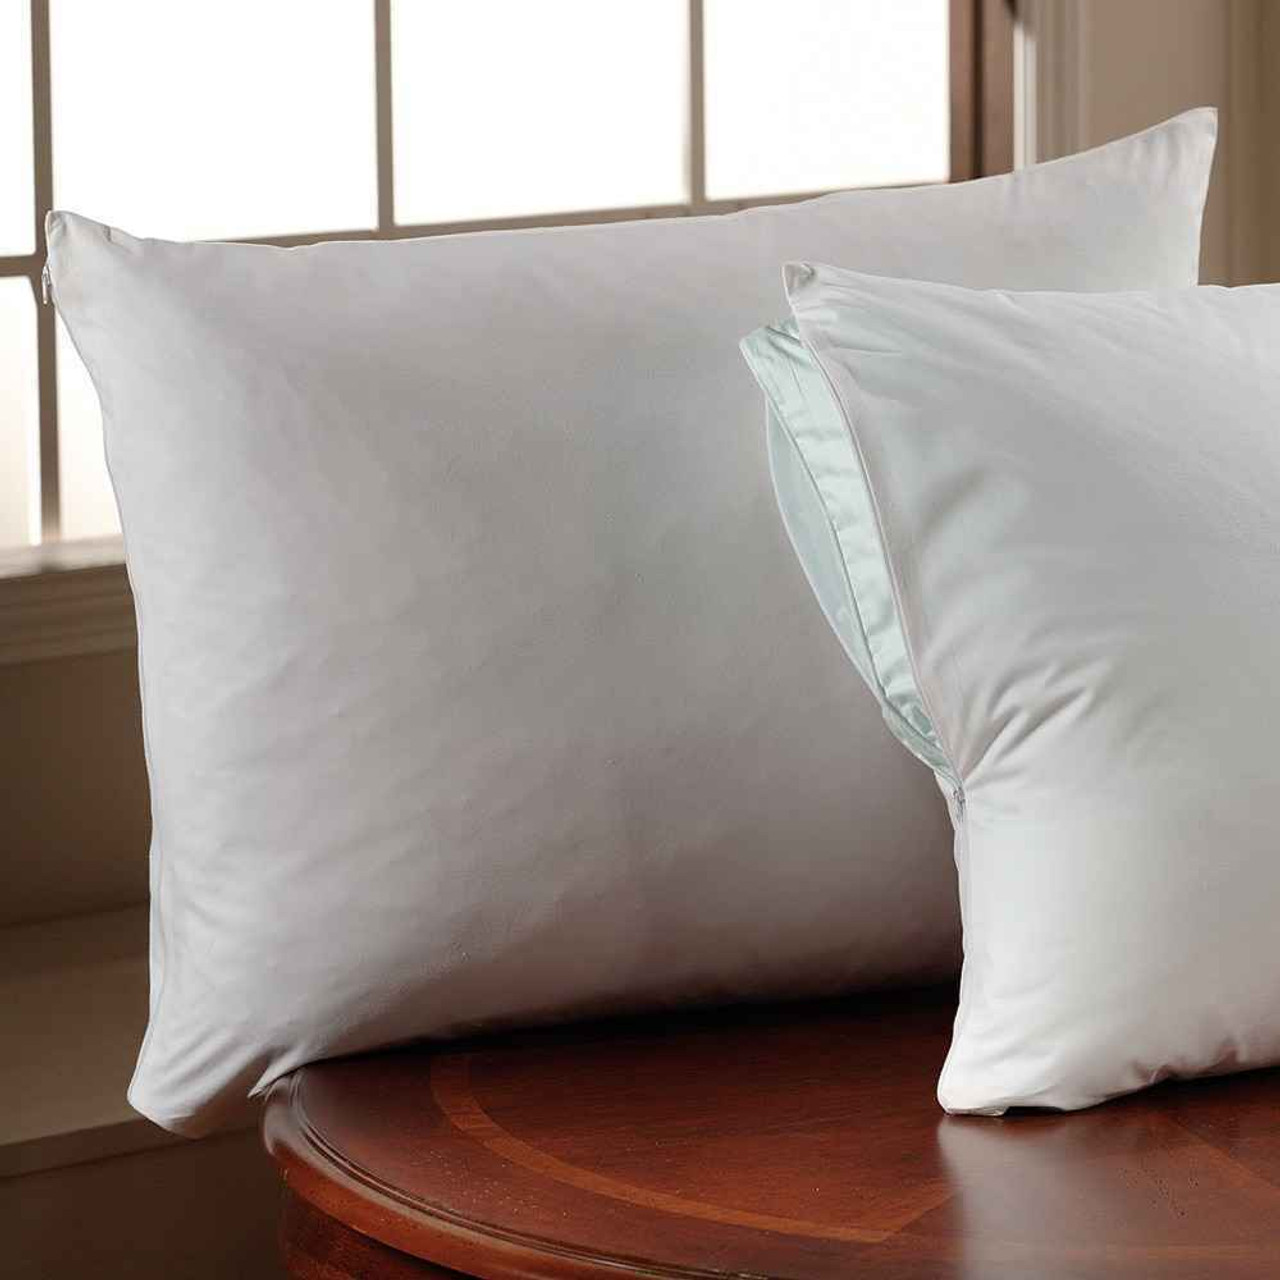 Super Soft Cotton Filling Material For Pillows, For Hotel